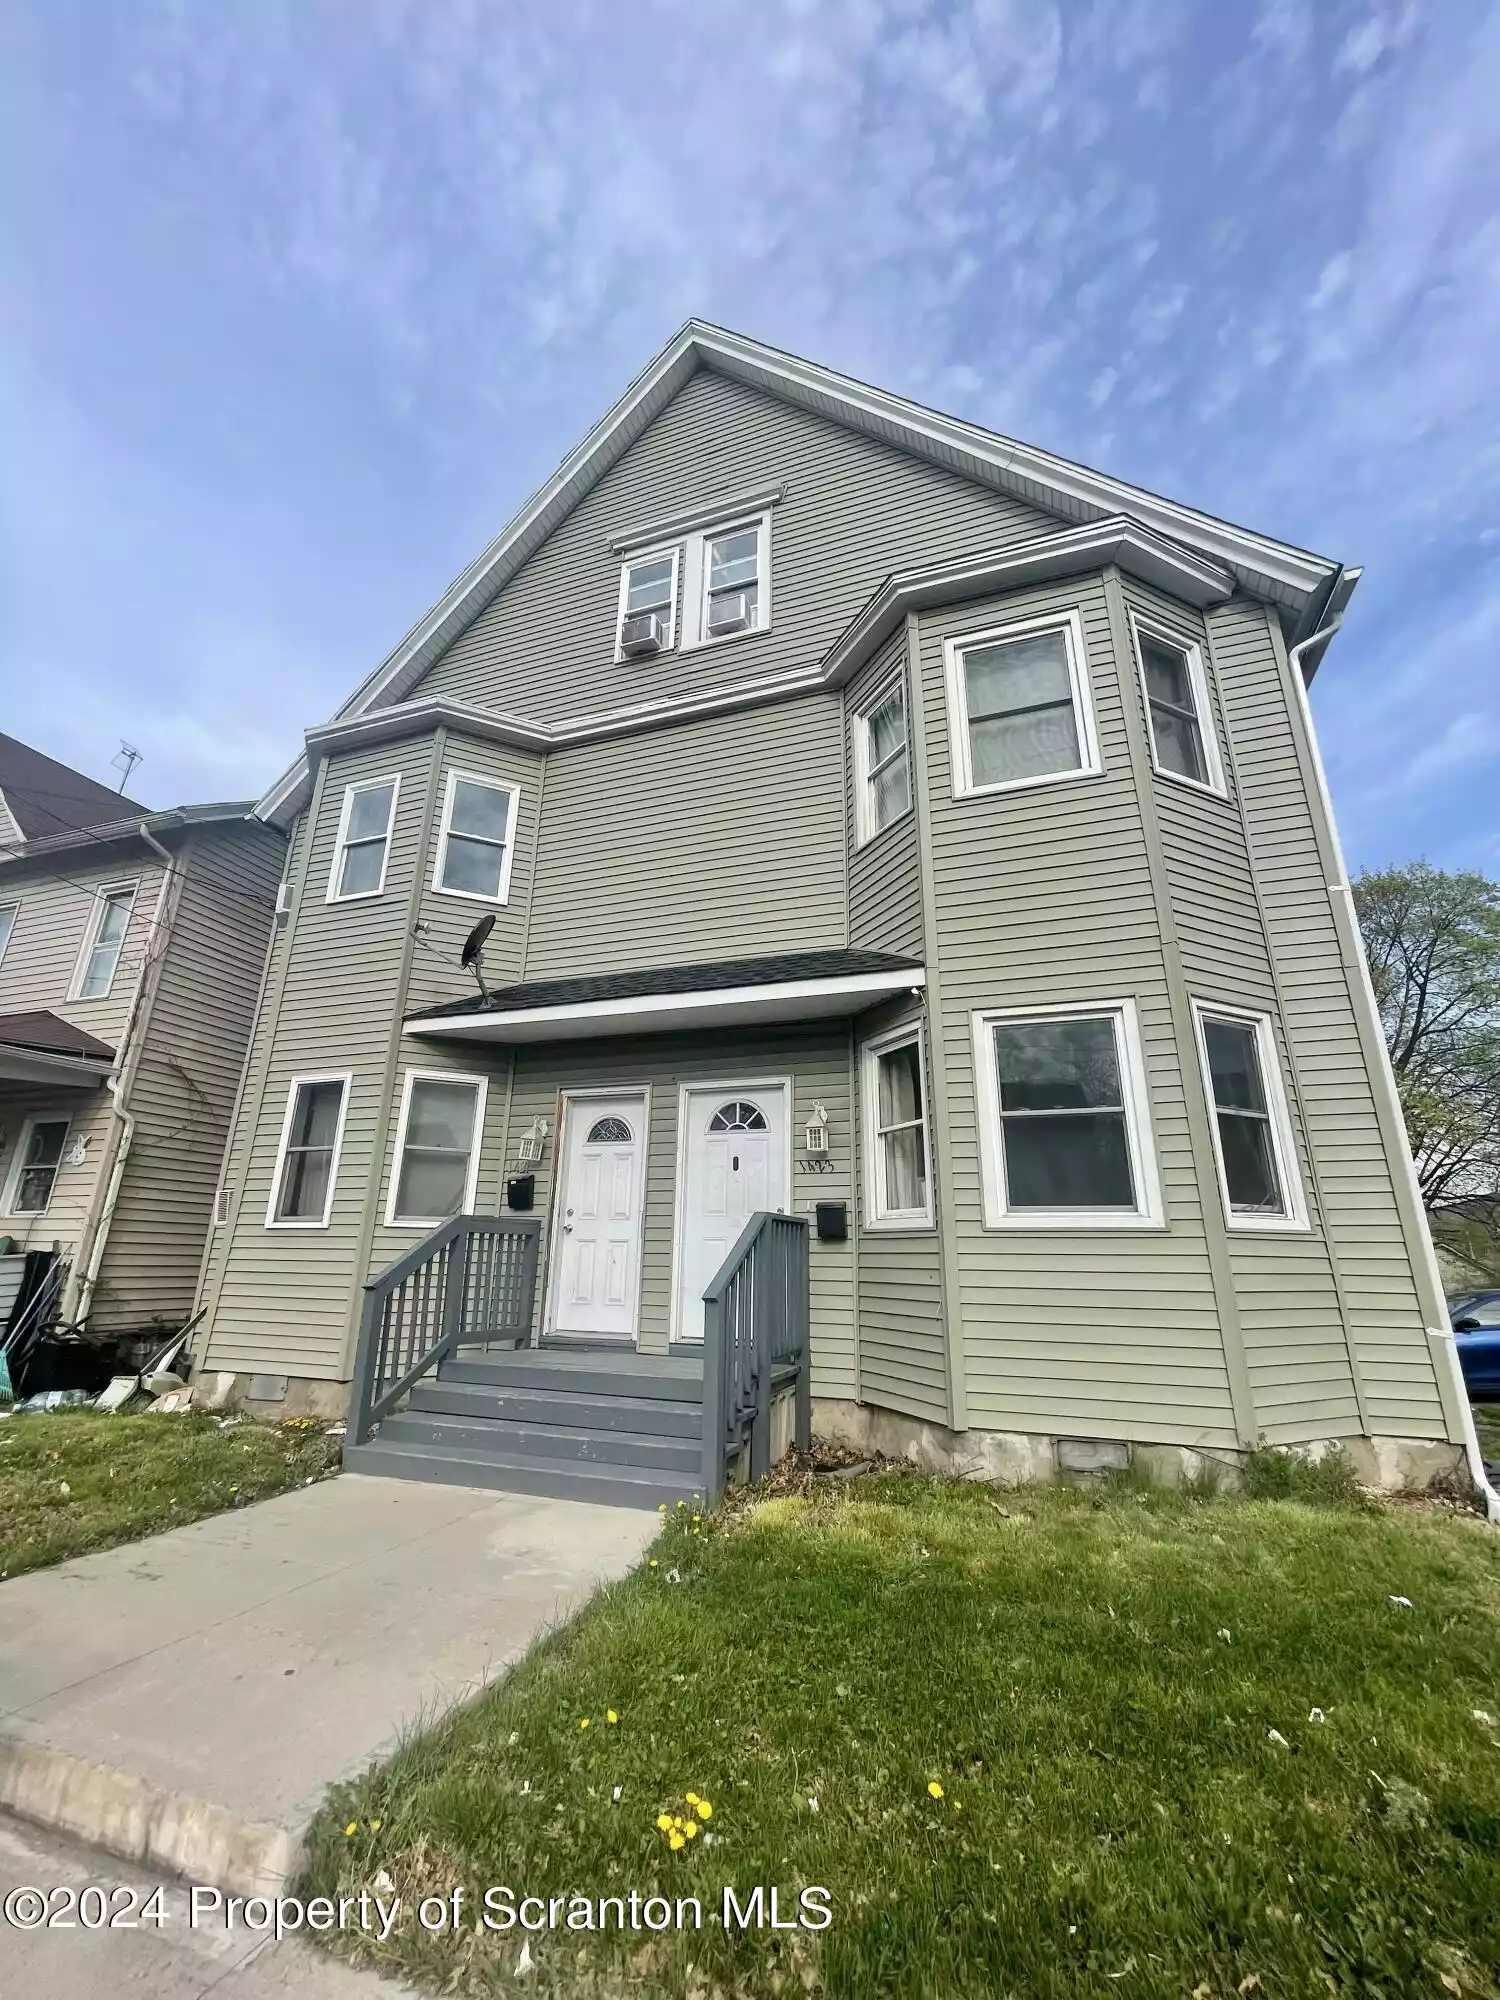 1423 Capouse Avenue, Scranton, Pennsylvania 18501, 8 Rooms Rooms,2 BathroomsBathrooms,Residential Lease,For Lease,Capouse,GSBSC2071